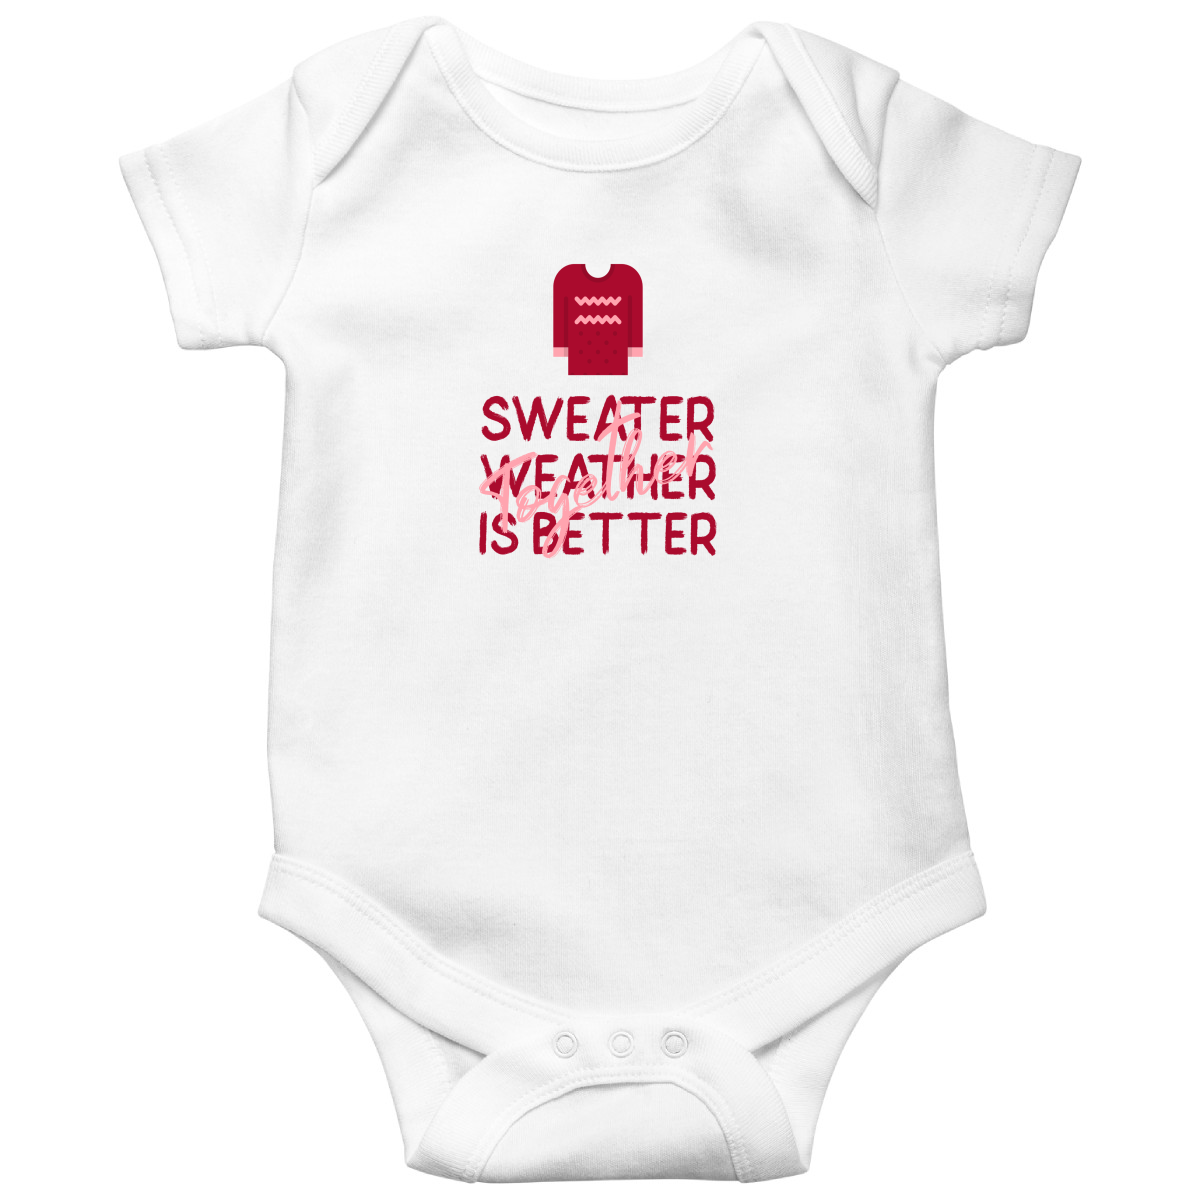 Sweather Weather is Better Together Baby Bodysuits